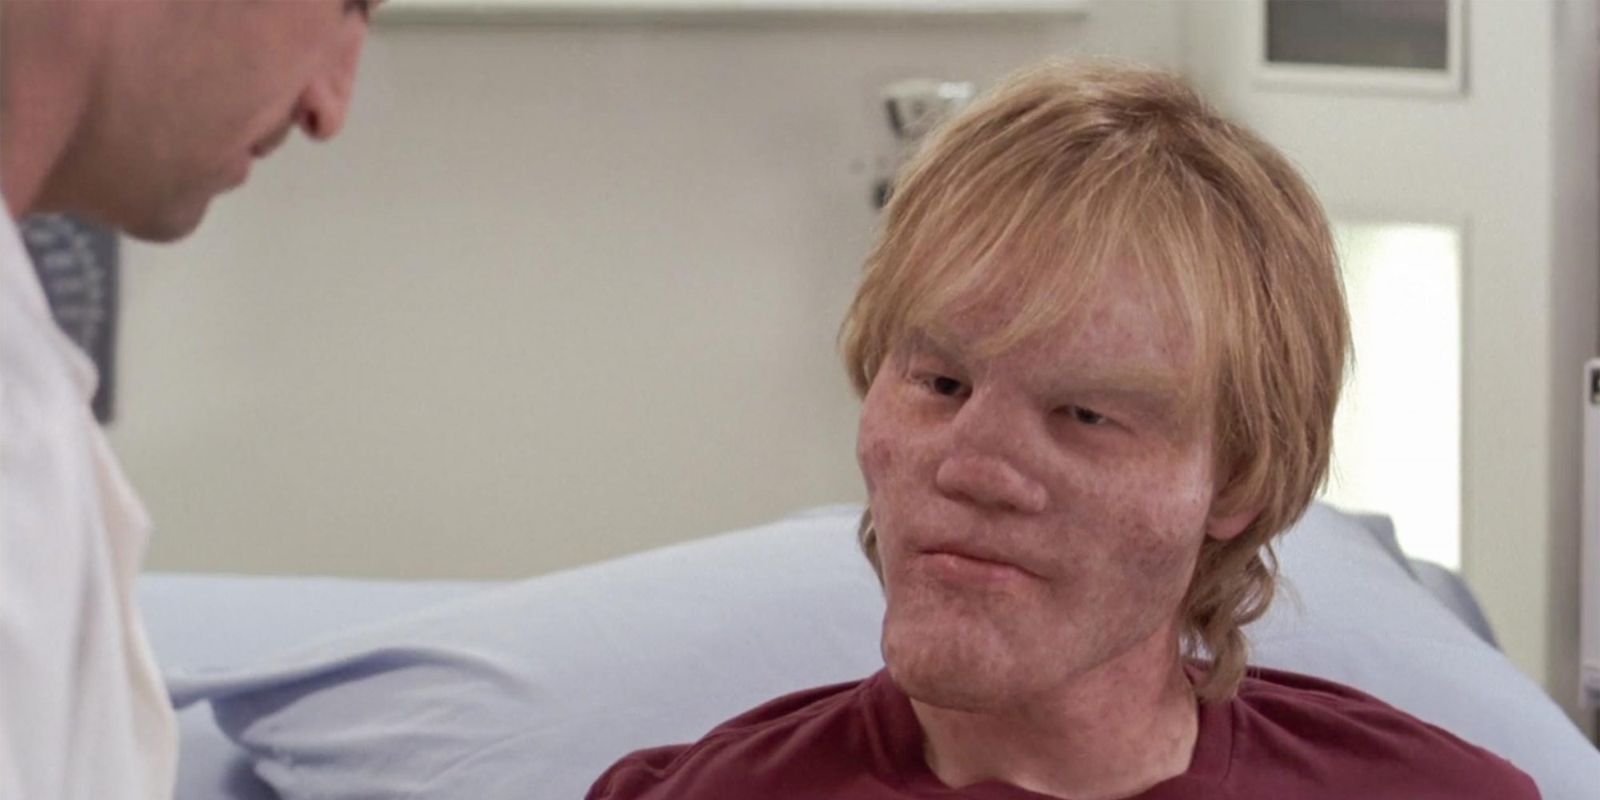 Jesse Plemons as Jake Burton, a teenager with a tumerous face in Grey's Anatomy Episode